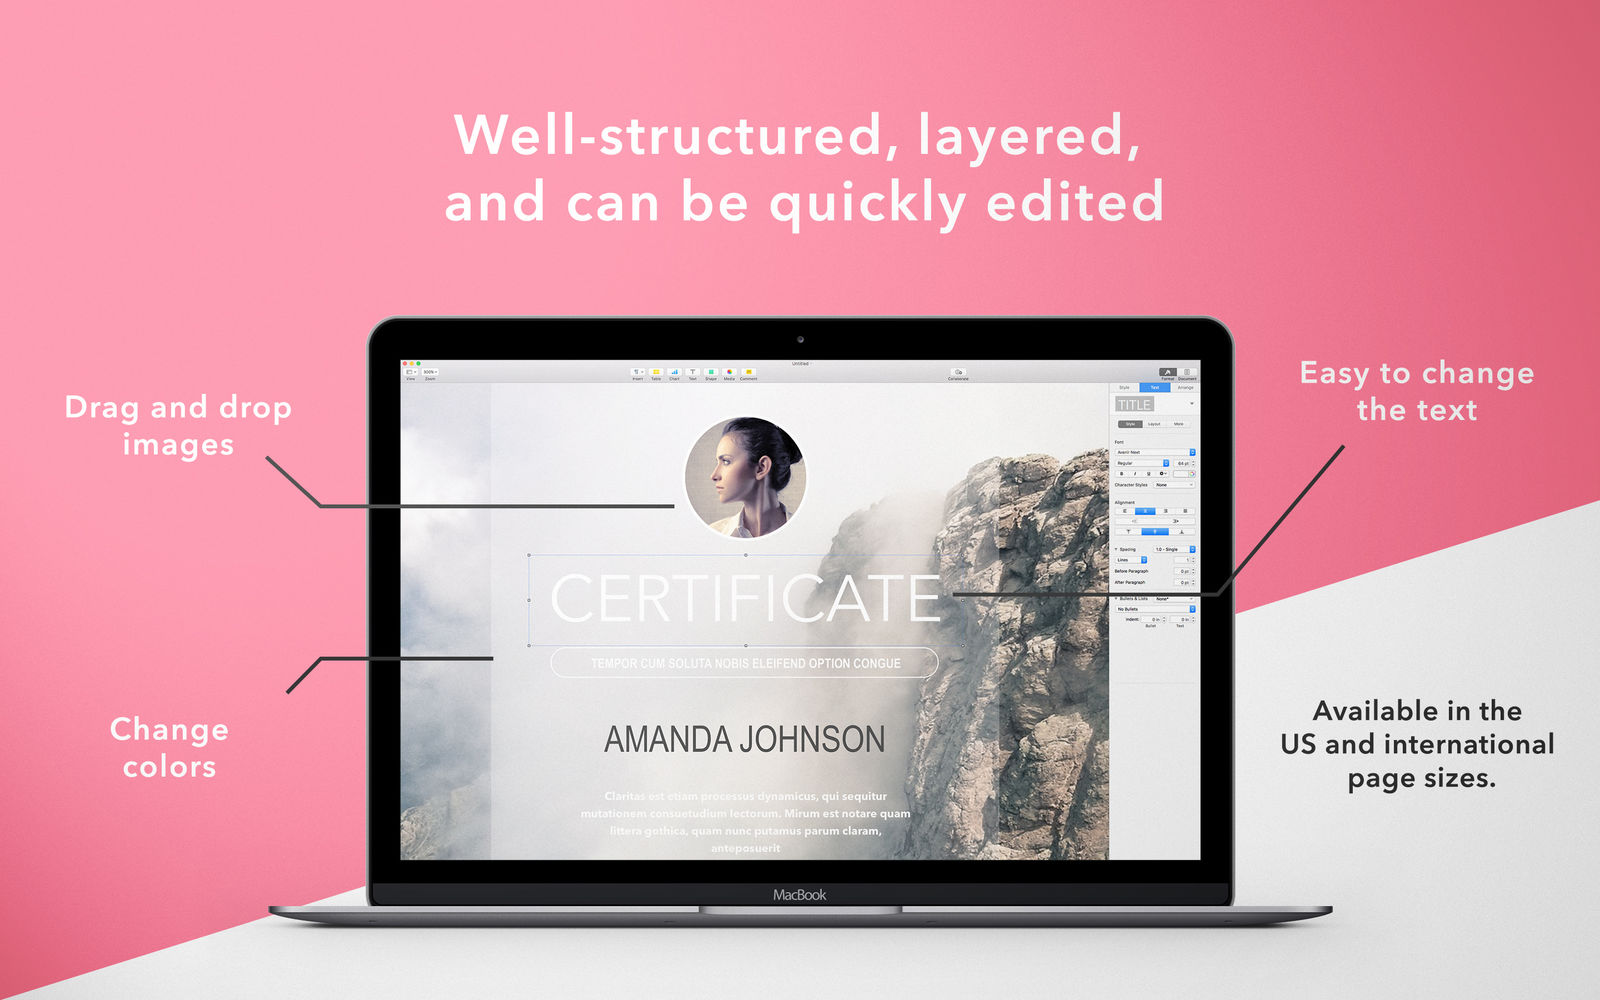 Certificate Templates - DesiGN 2.0.1 for Mac|Mac版下载 | Pages 证书模板合集